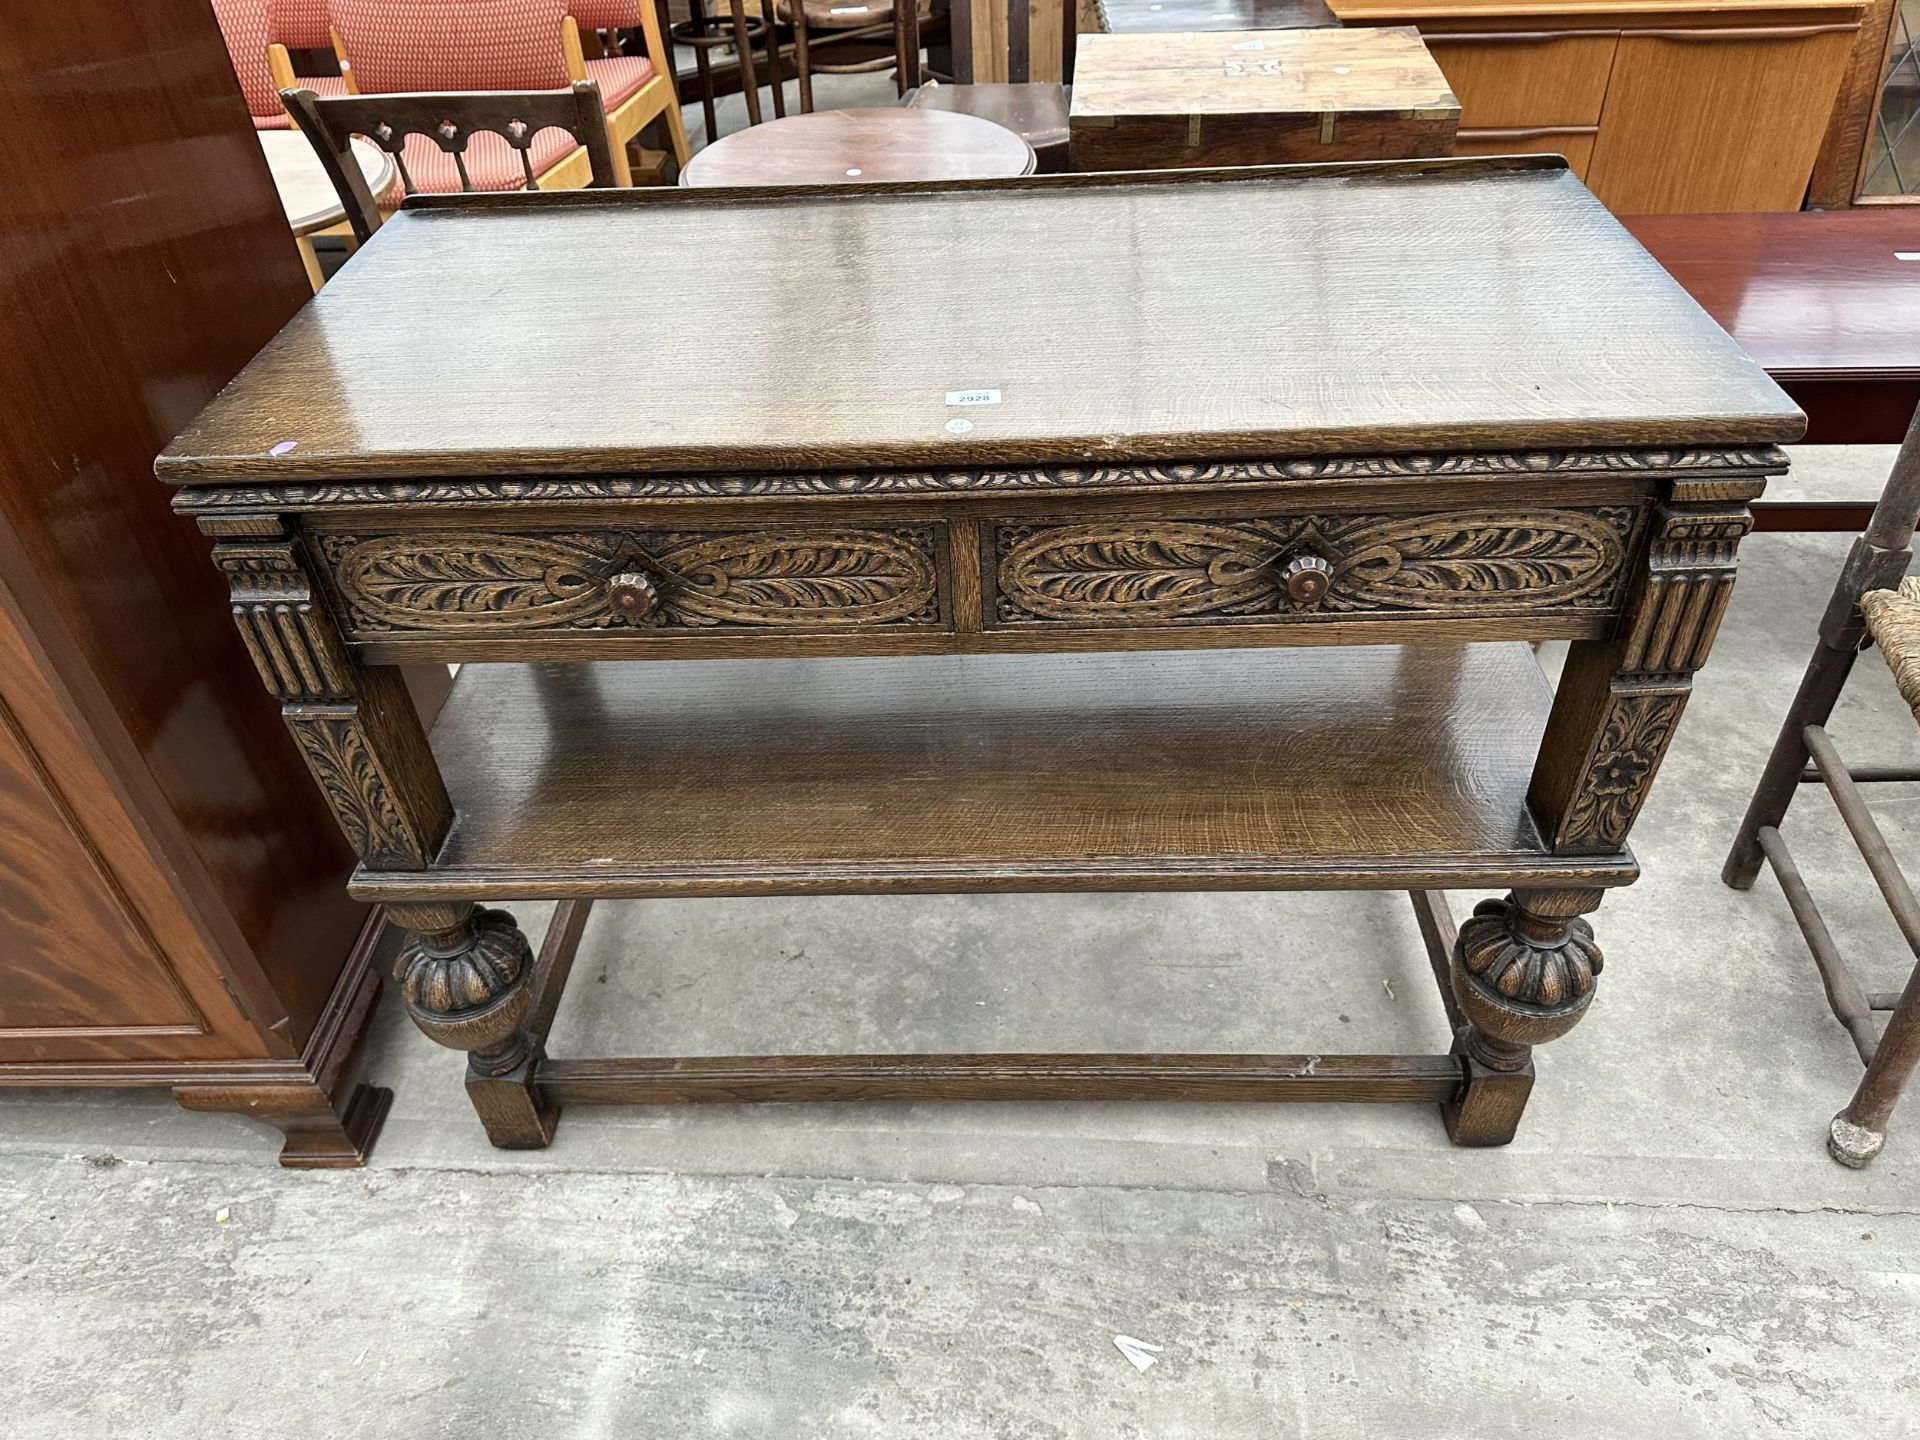 A JACOBEAN STYLE OAK BERICK FURNITURE SIDE-TABLE ENCLOSING TWO DRAWERS ON OPEN BASE WITH POT